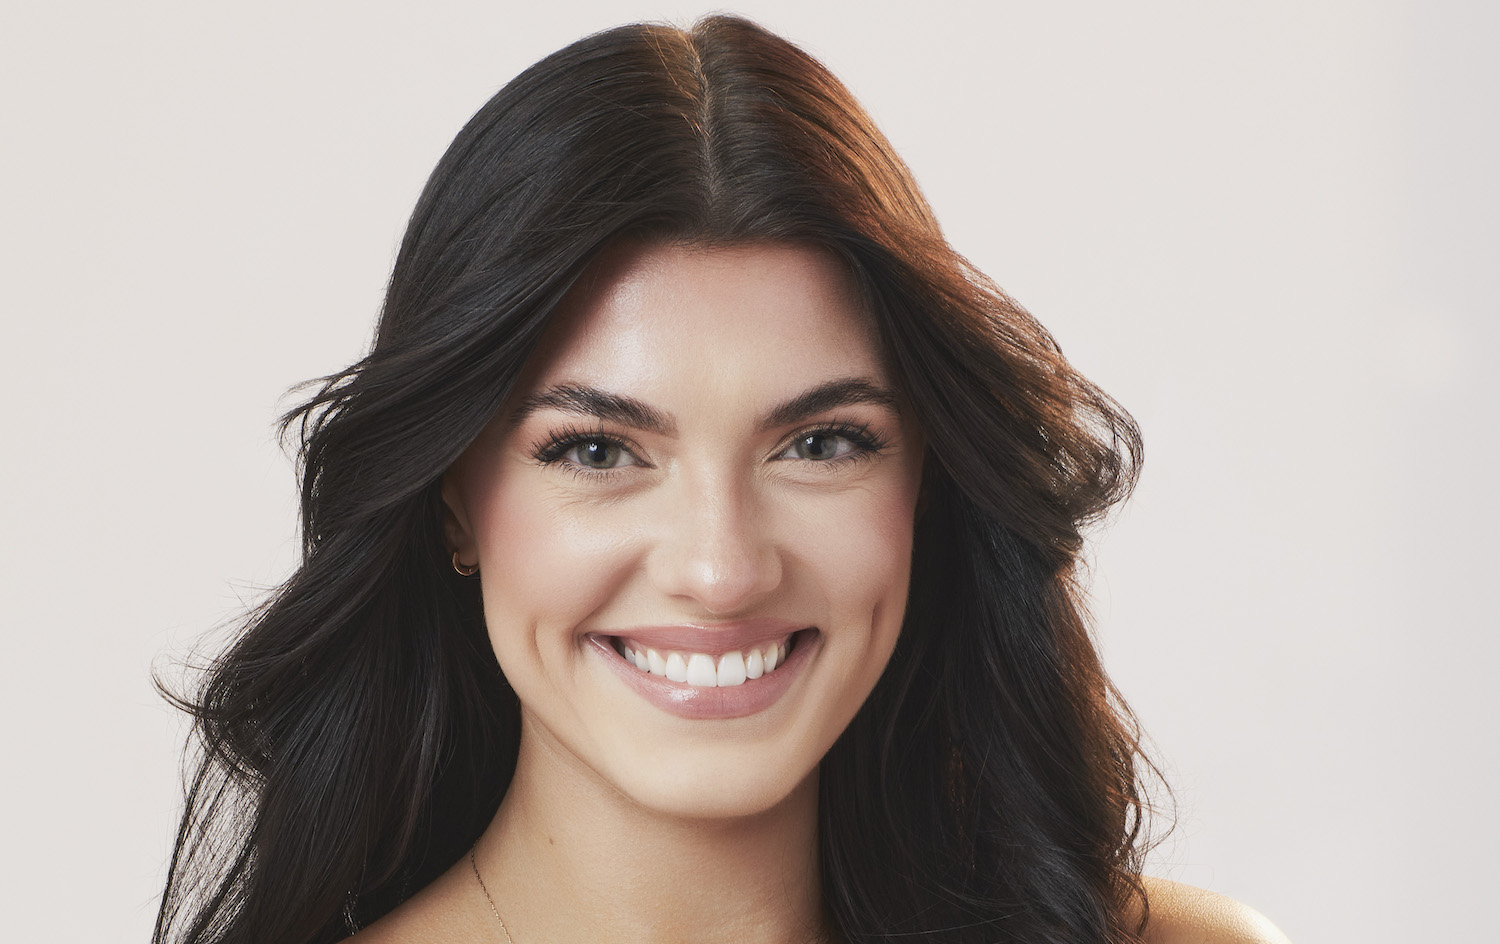 'The Bachelor' star Gabi Elnicki seen here in her official headshot for the show.